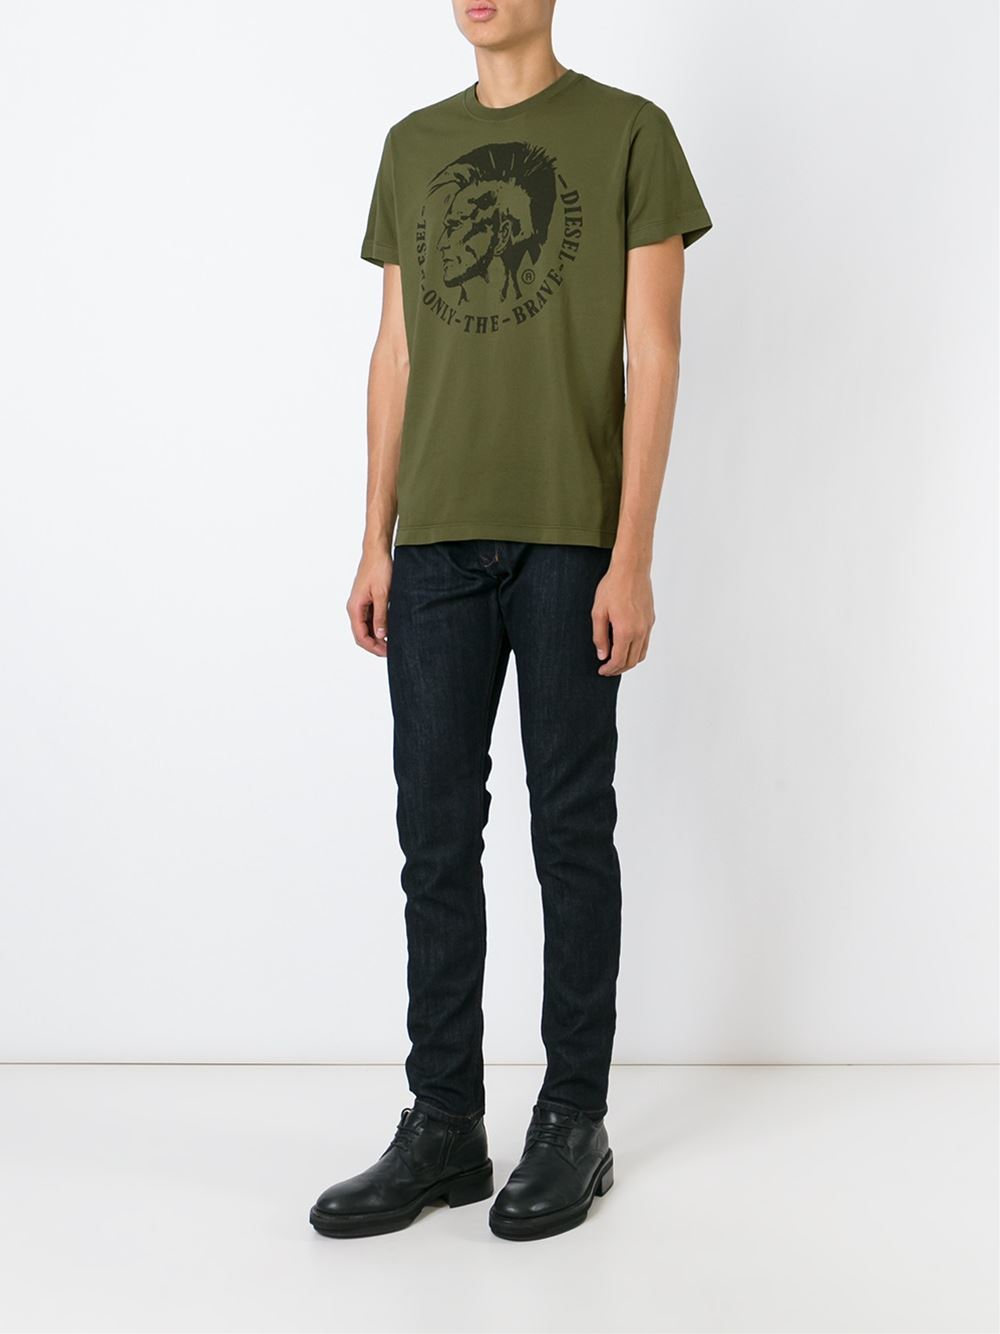 DIESEL Cotton Only The Brave T-shirt in Green for Men - Lyst